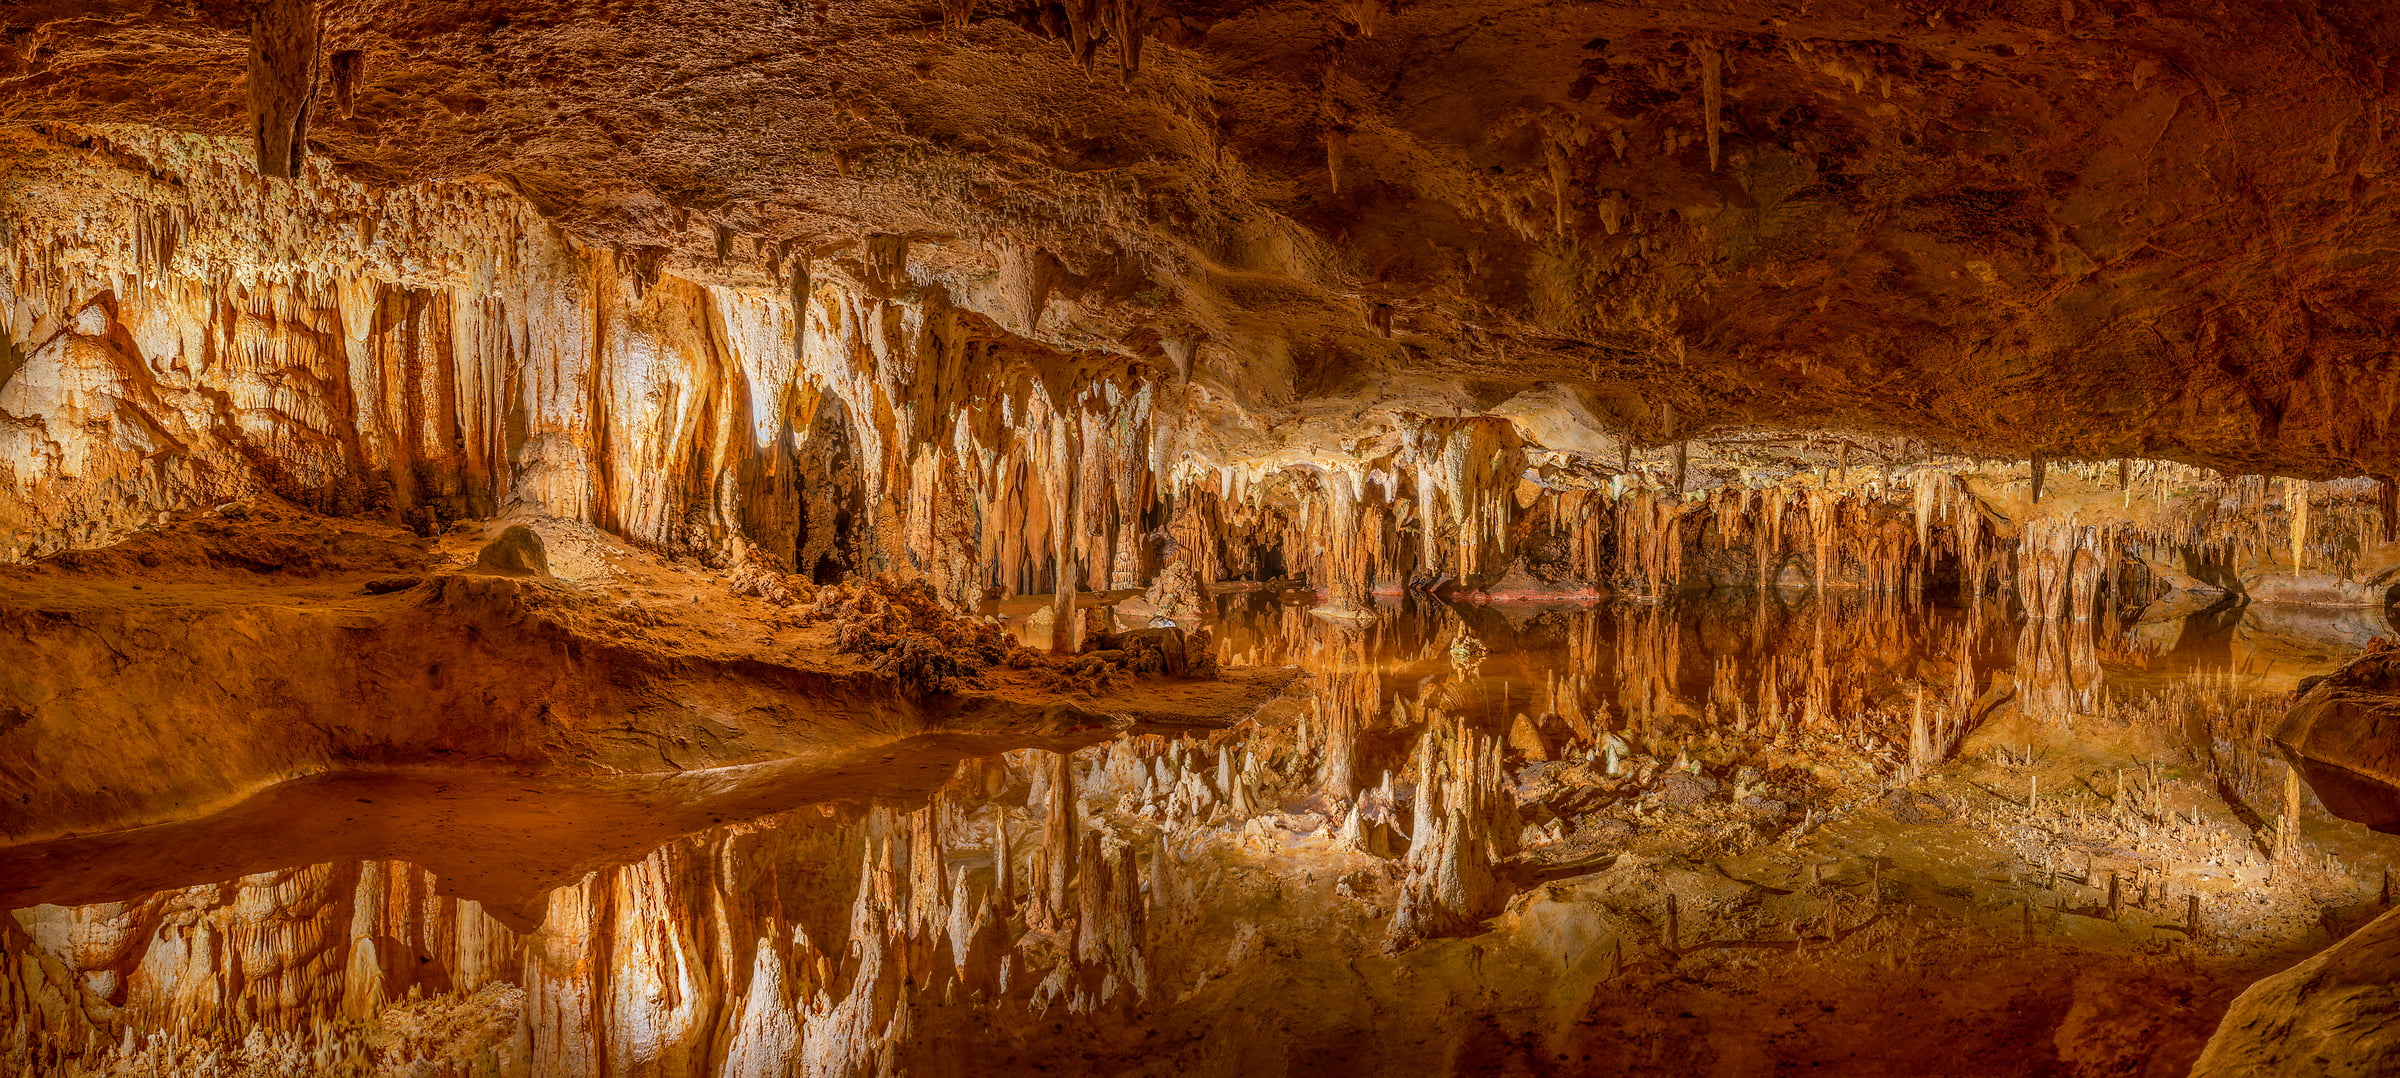 744 megapixels! A very high resolution, large-format VAST photo print of a cave with an underground lake, stalagmites, and stalactites; panorama photograph created by Tim Lo Monaco in Dream Lake, Luray Caverns, Shenandoah Valley, Luray, Virginia.